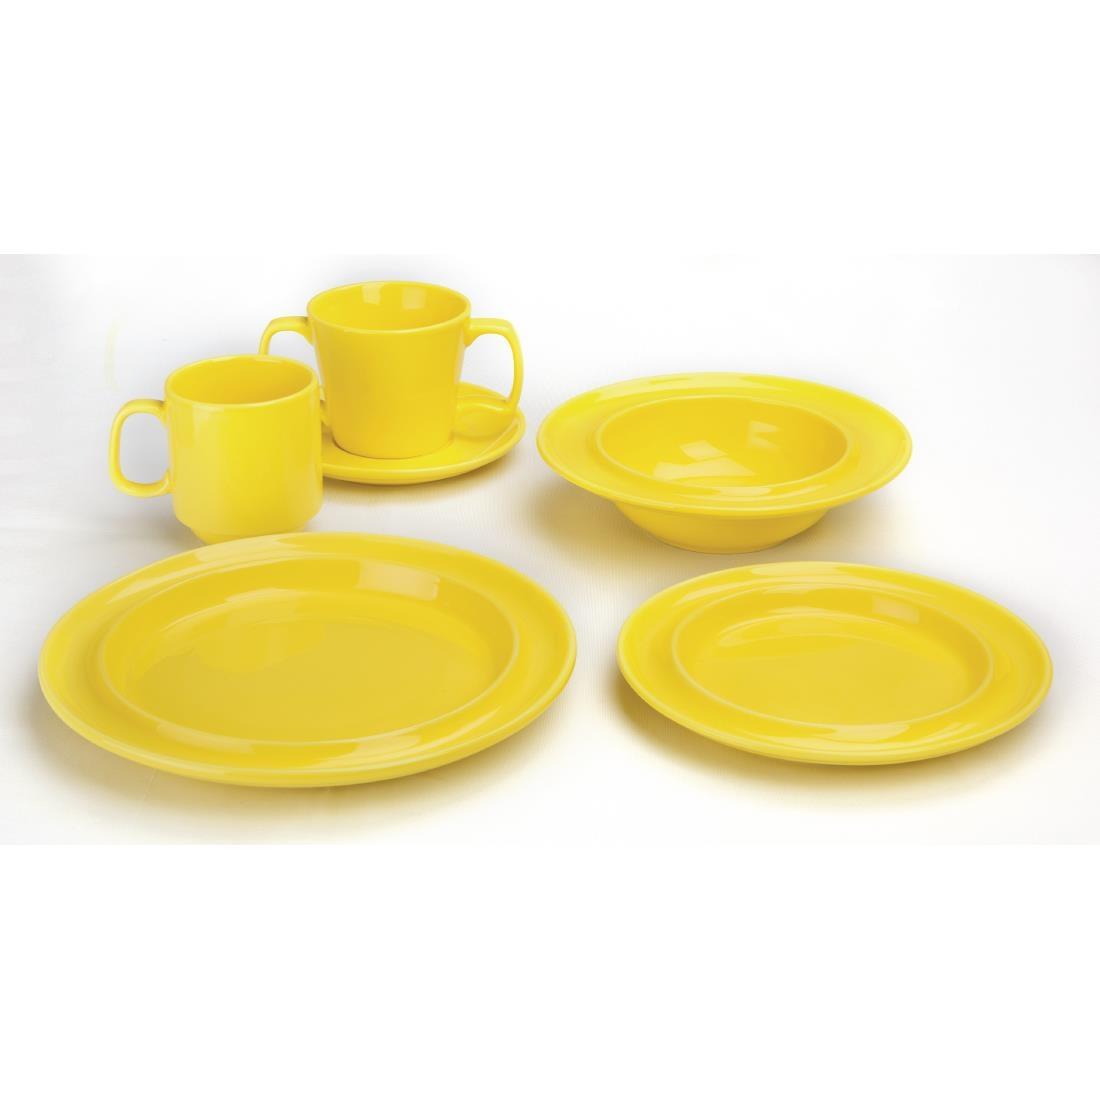 Olympia Heritage Raised Rim Plates Yellow 253mm (Pack of 4) - DW147  - 5